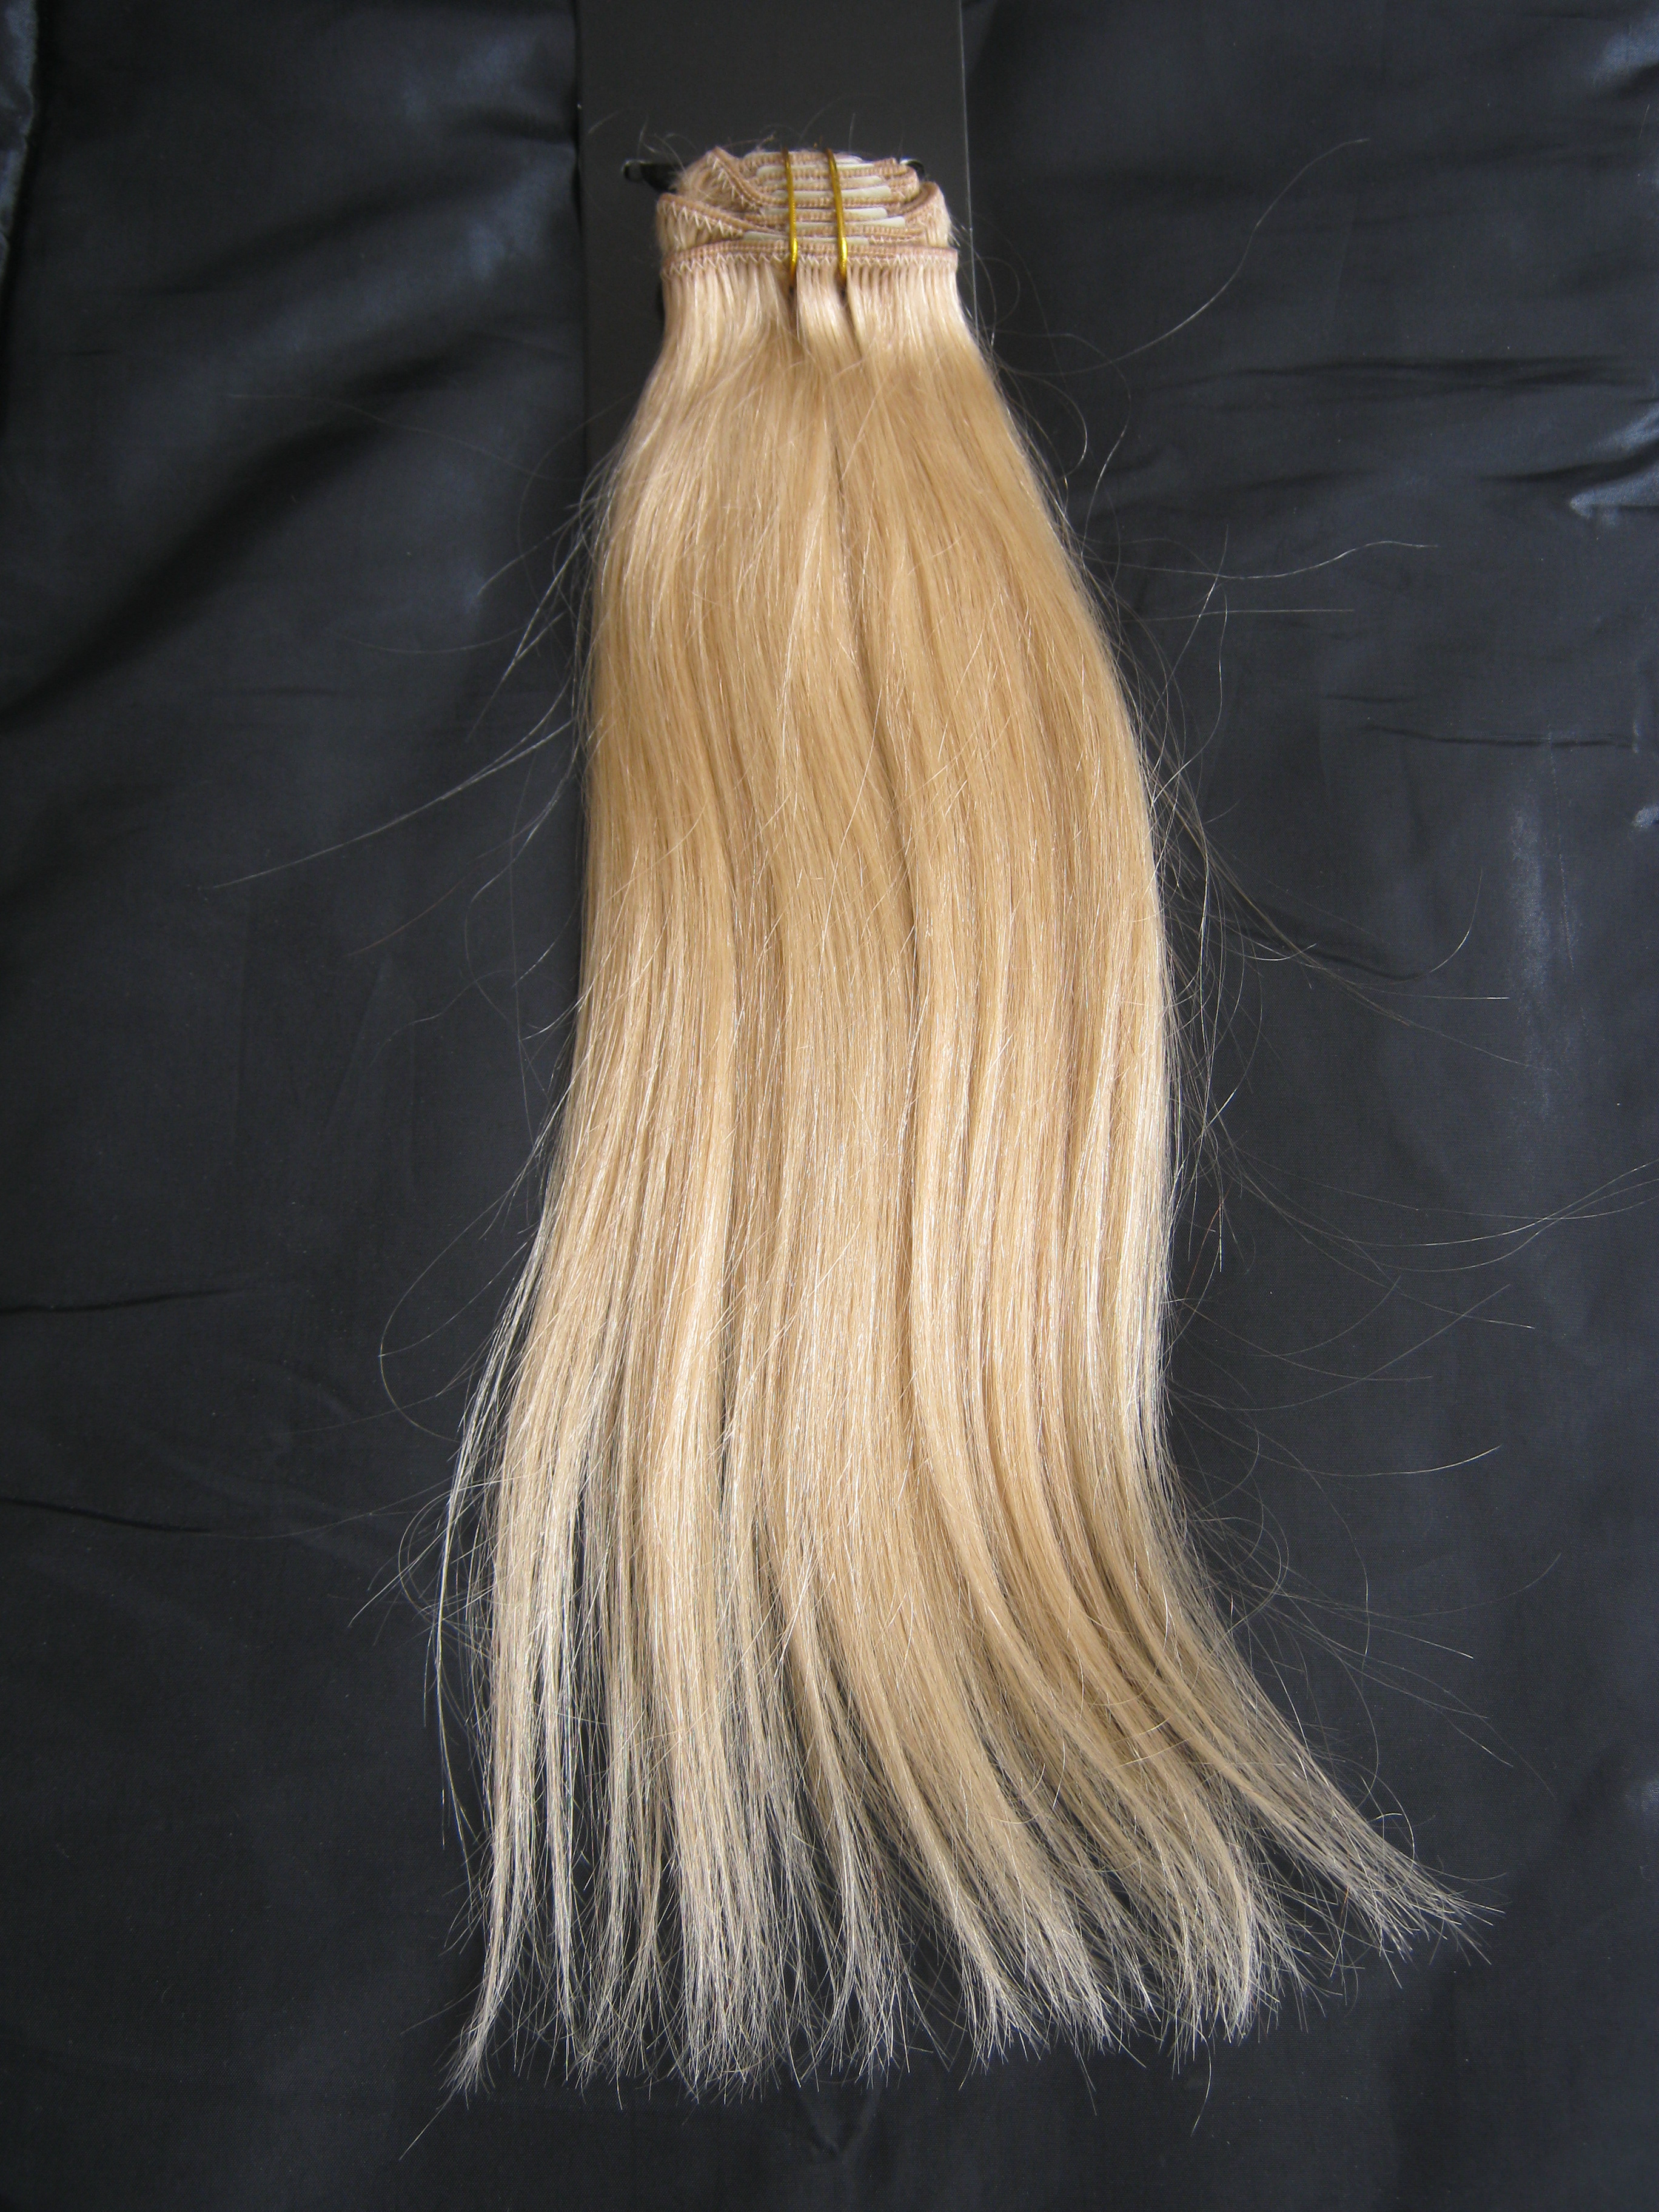 Halo Hair Extensions -Golden Blonde #24 Review - Steph Style2736 x 3648